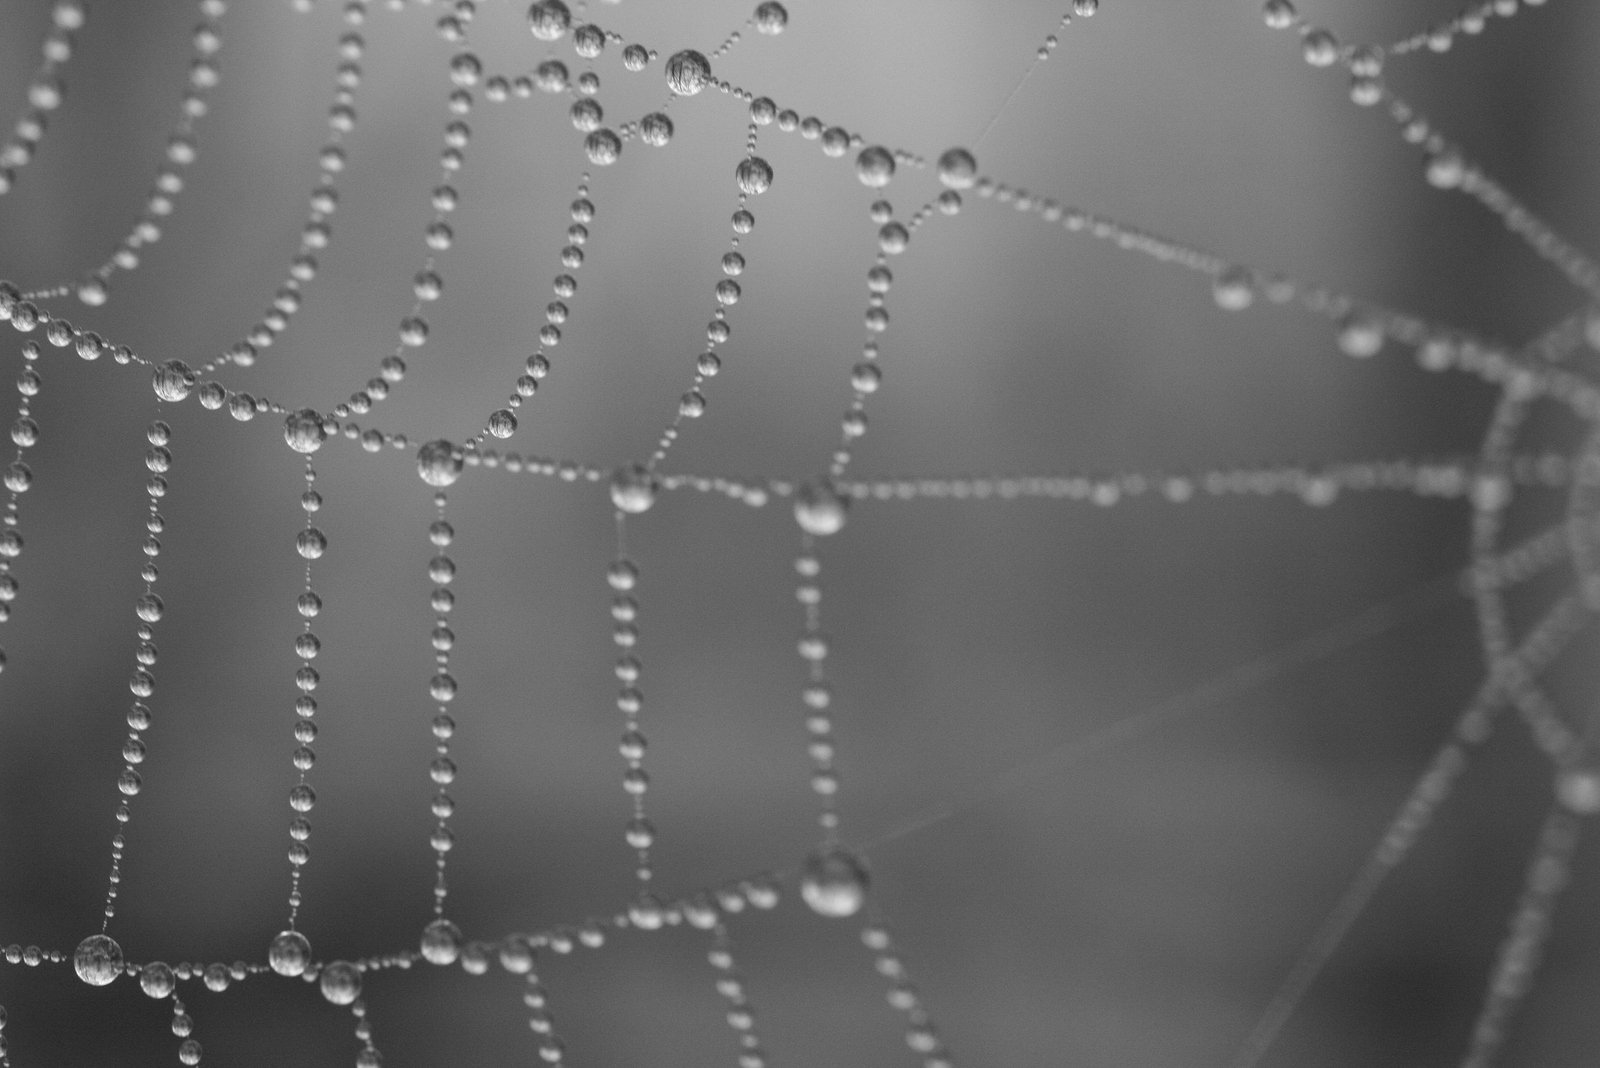 drops on the web with water droplets on it